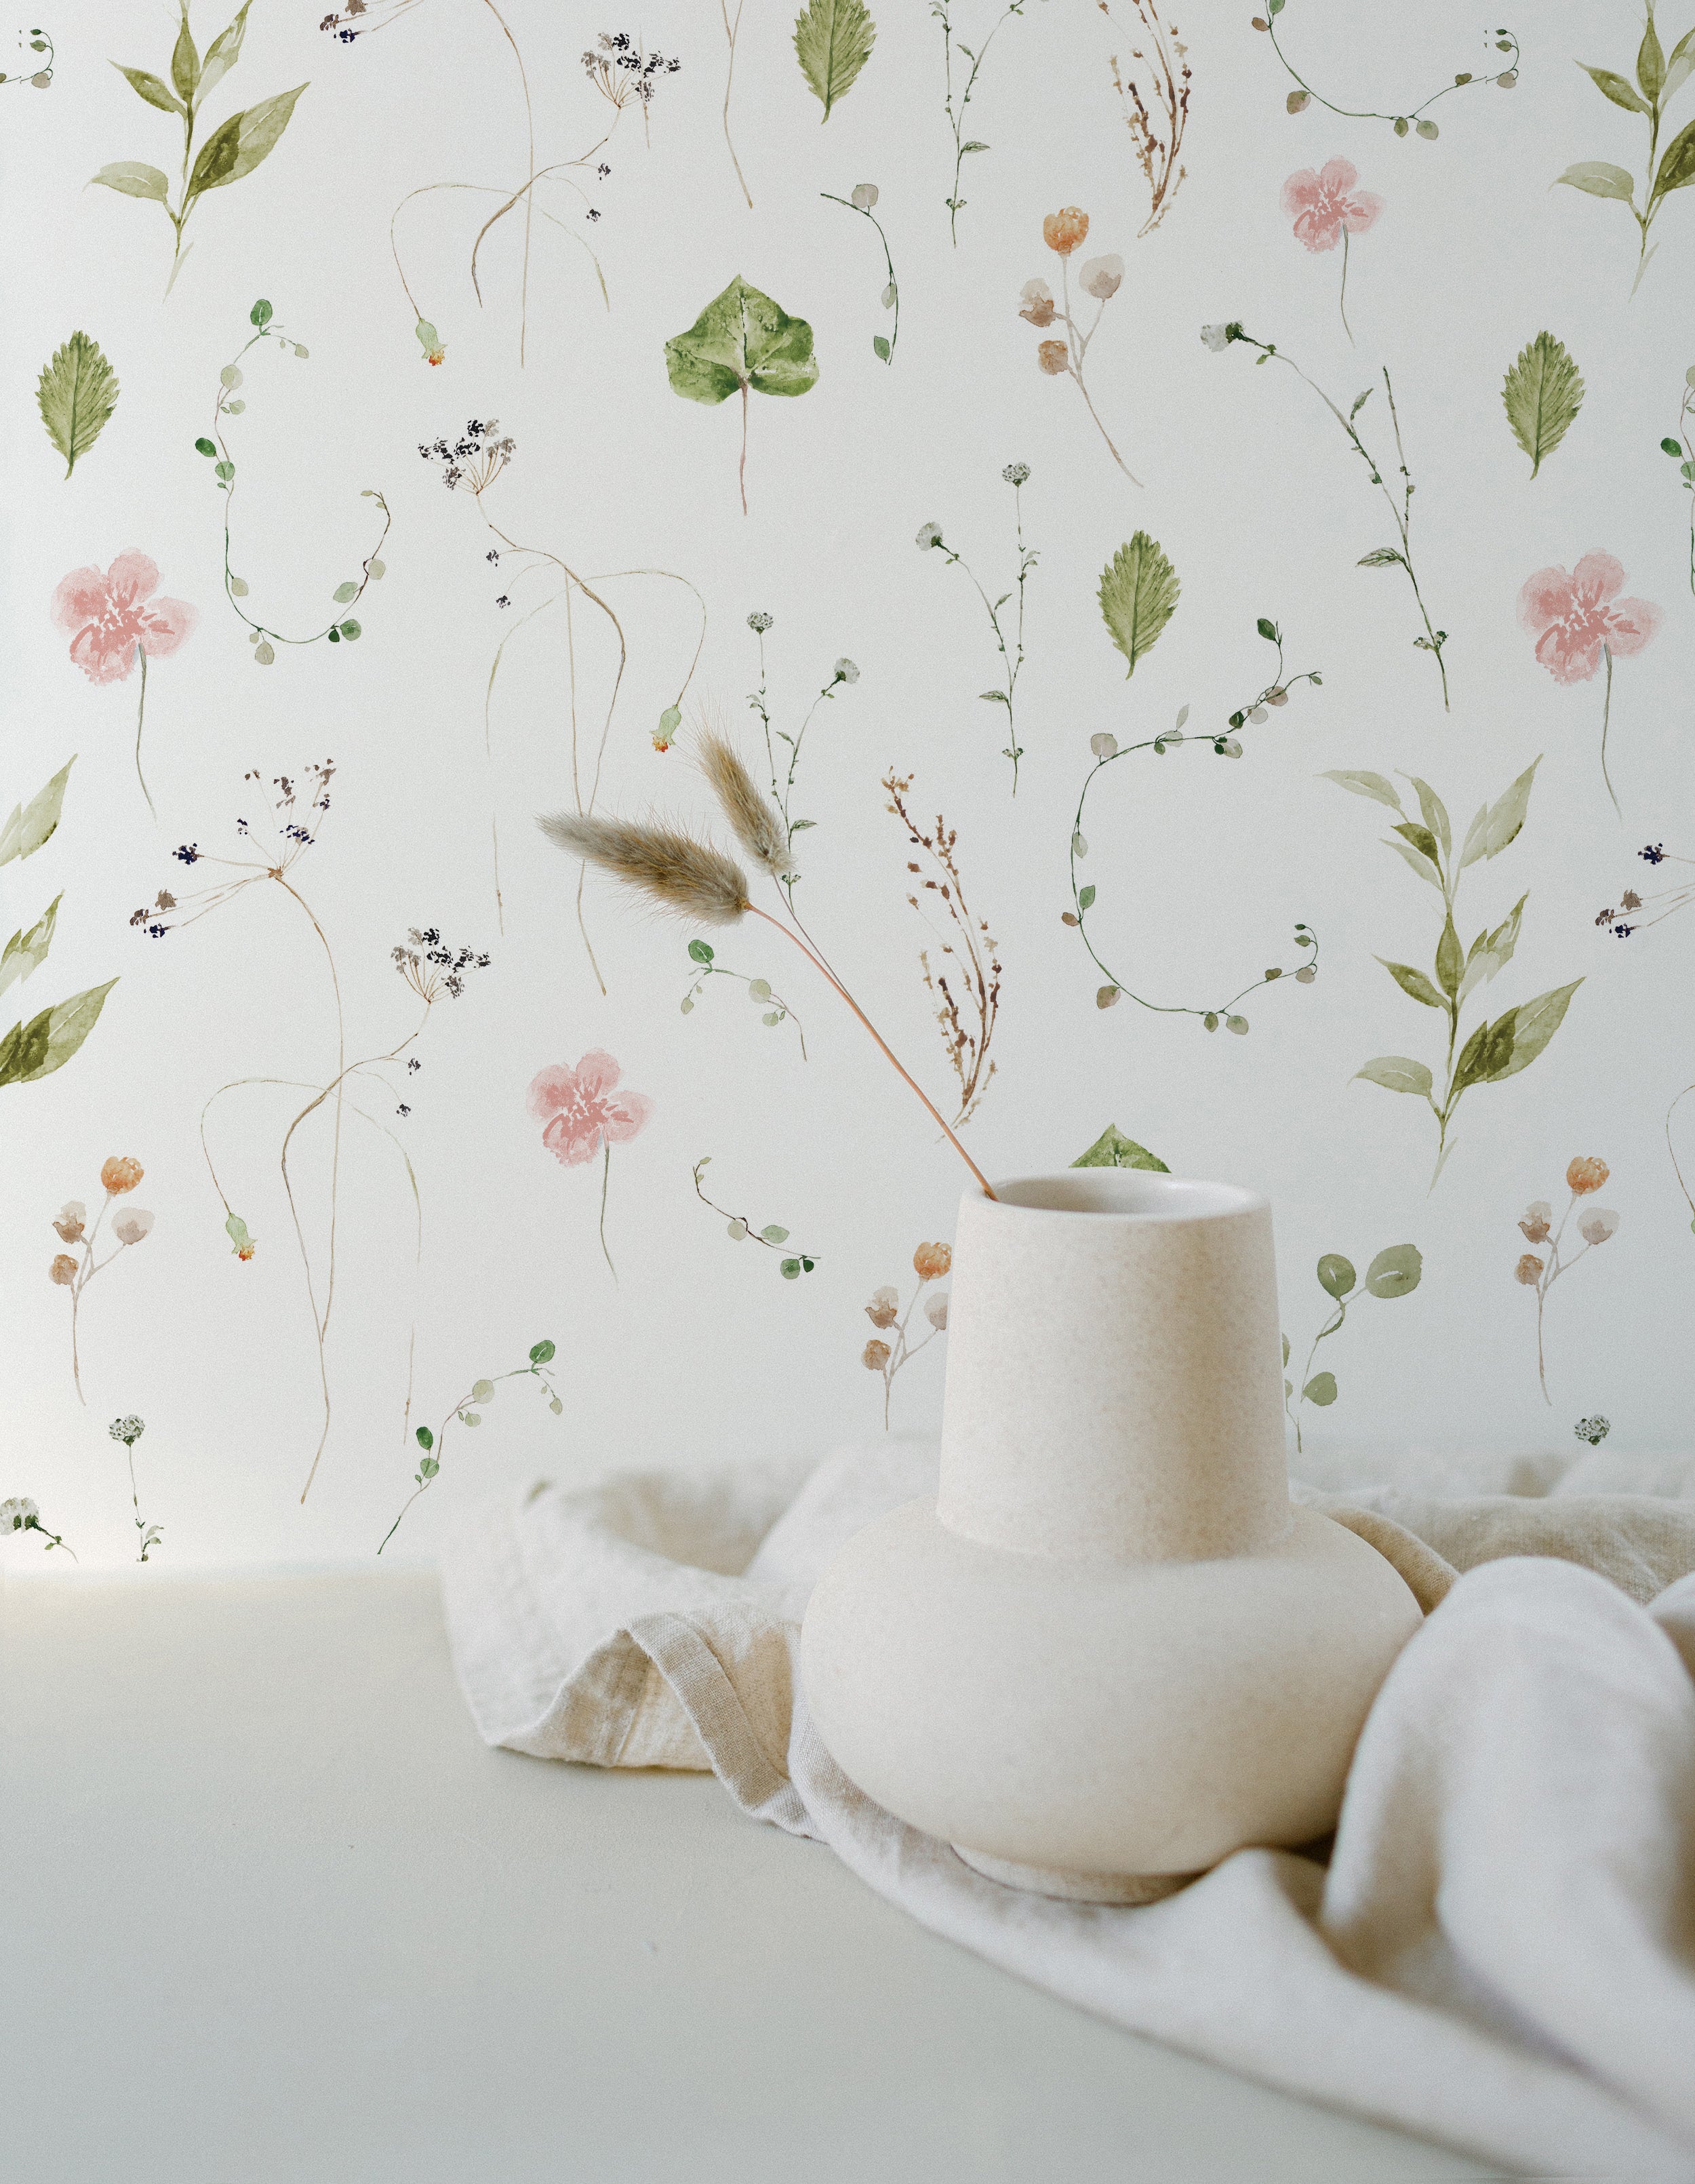 A serene and artistic display featuring the Modern Watercolour Floral Wallpaper in Dusty Pink as a backdrop. The wallpaper showcases a delicate array of watercolor flowers and foliage in shades of pink, green, and beige, giving the impression of a hand-painted wall. A sculptural vase in front of the wallpaper adds to the soft and organic feel of the setting.